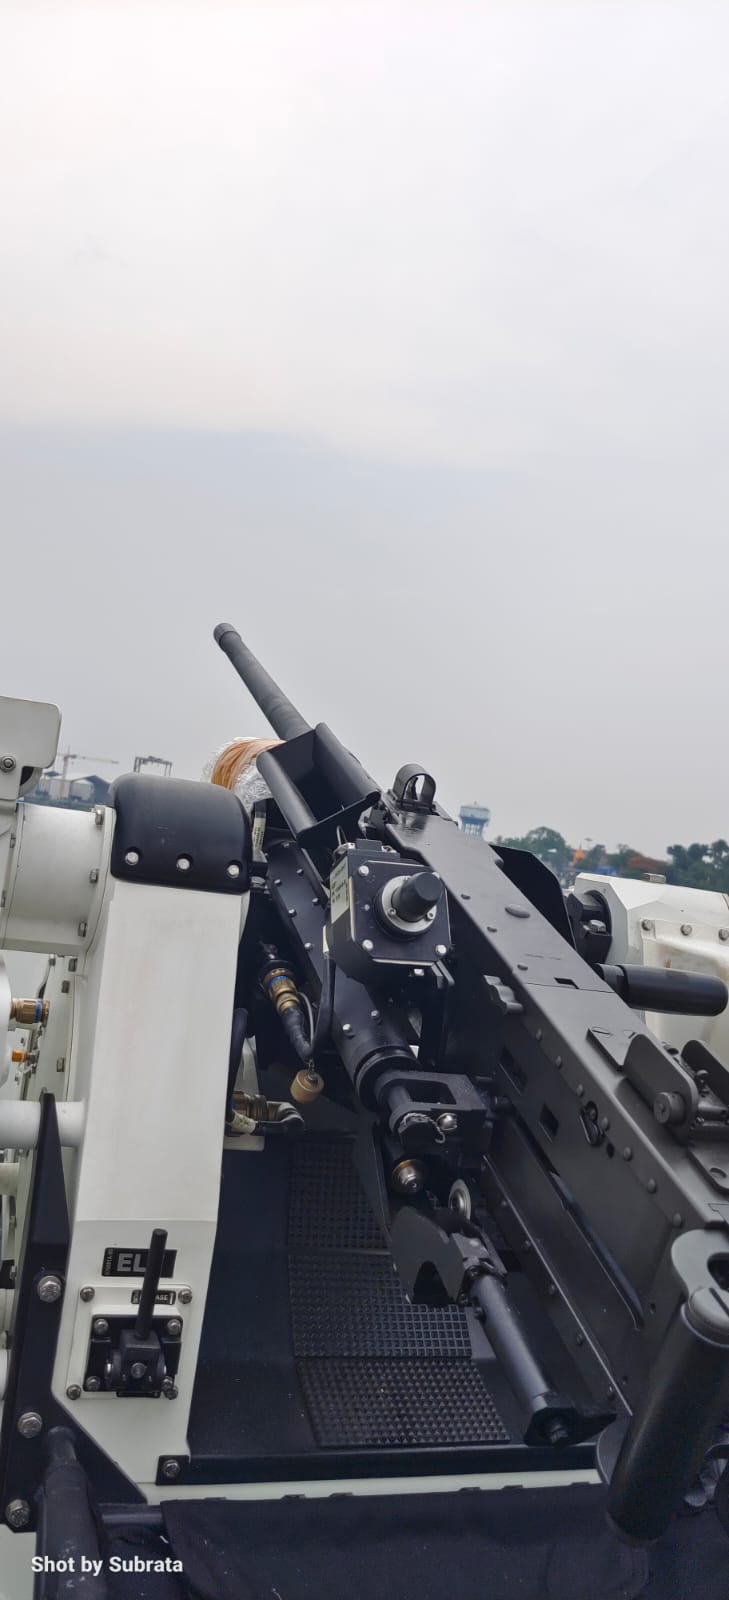 On successfull installation of SRC Guns (PORT & STBD) onboard ICGS Rajratan, the warship hauled out from Wet Basin on 02 Jun 23